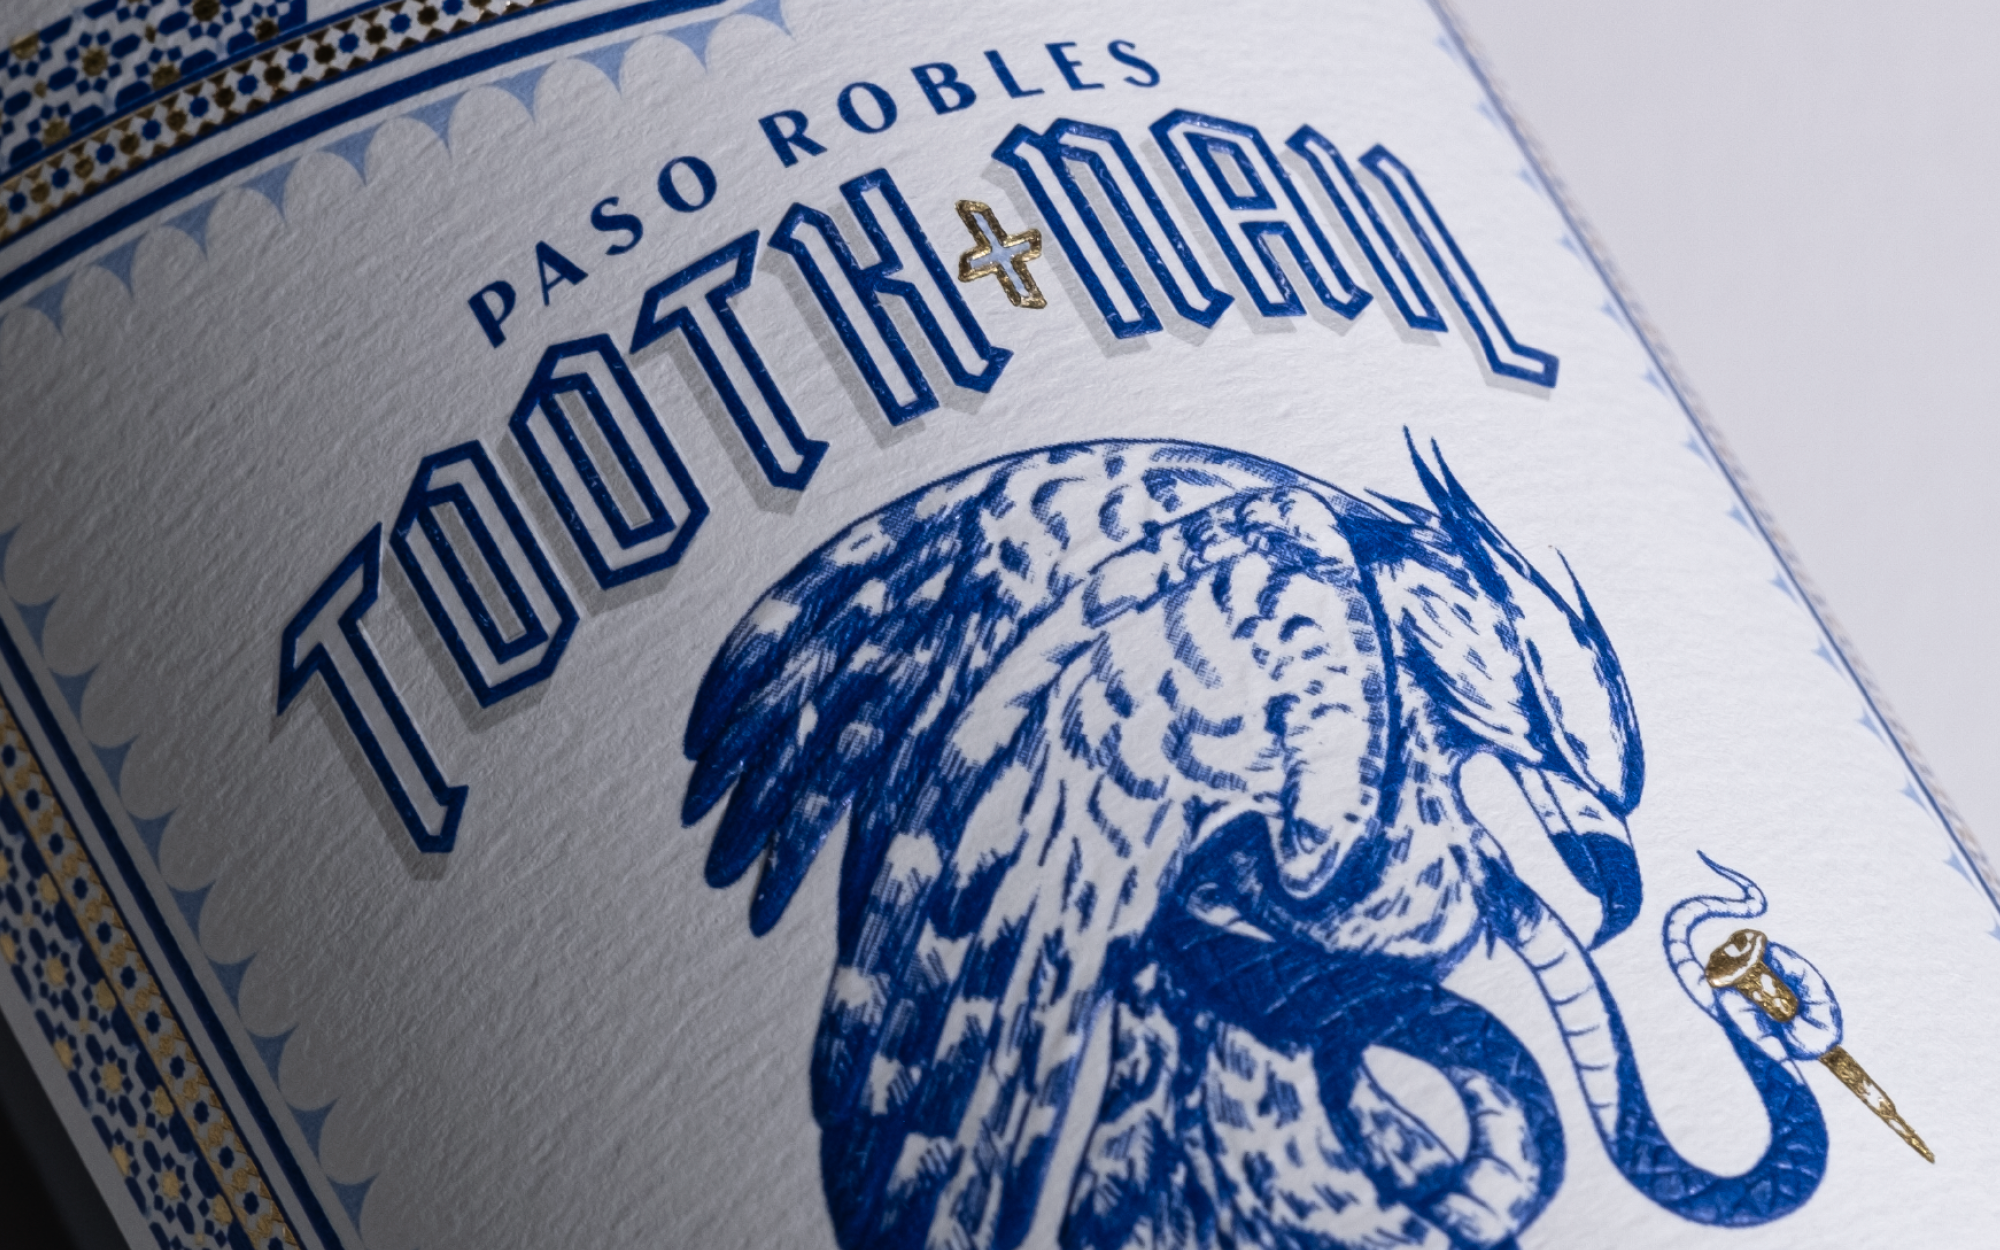 Paso Robles Tooth + Nail wine packaging design by Studio Ethur Ethur